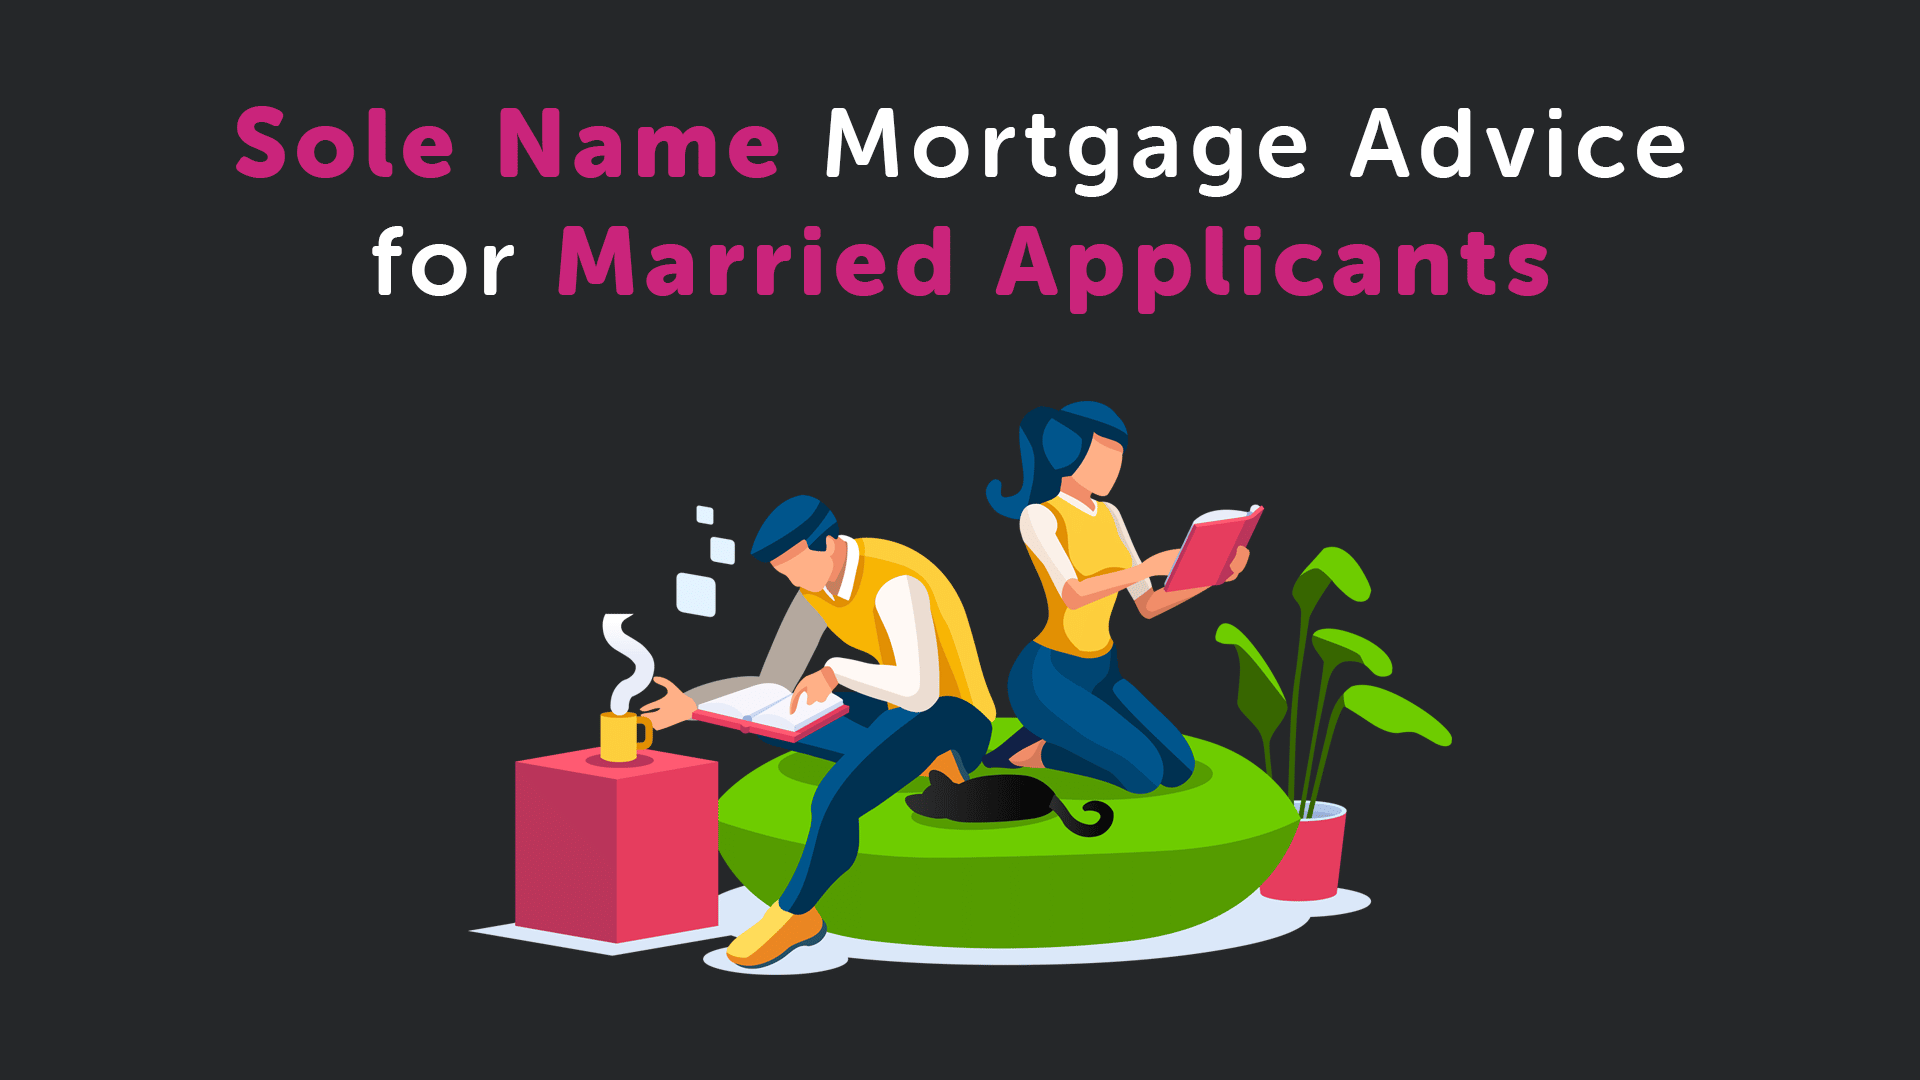 Mortgage Advice for a Married Applicant Applying in Their Sole Name